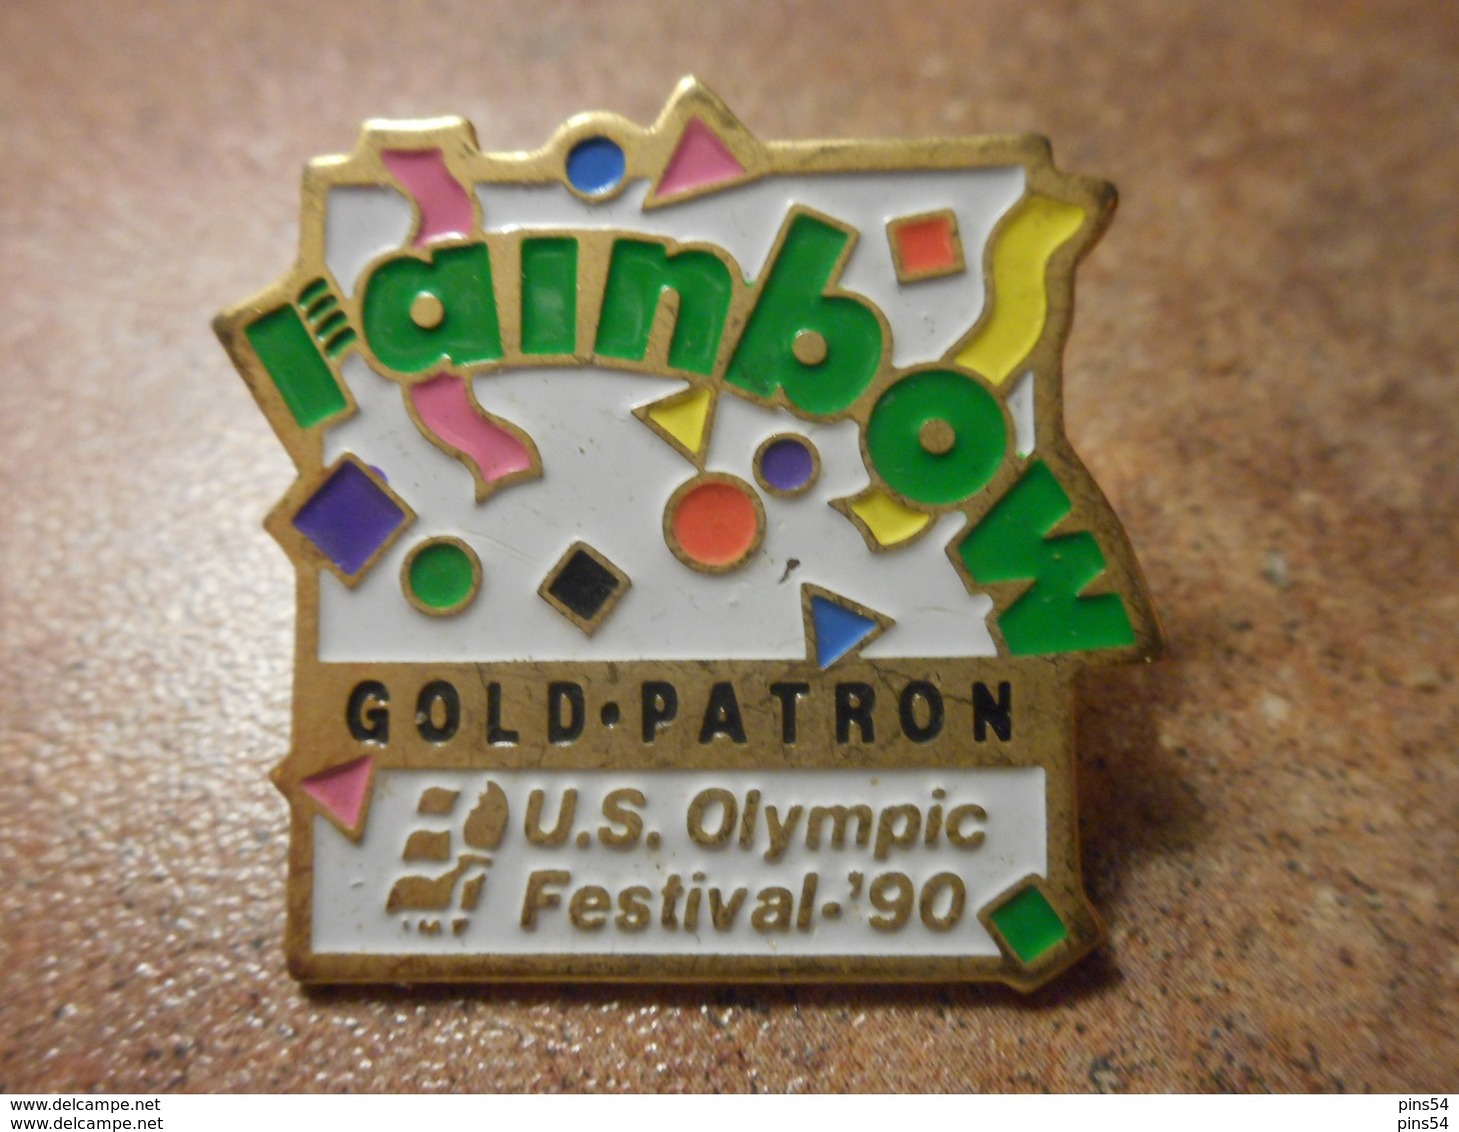 A024 -- Pin's Rainbow Gold Patron US Olympic Festival 90 - Jeux Olympiques